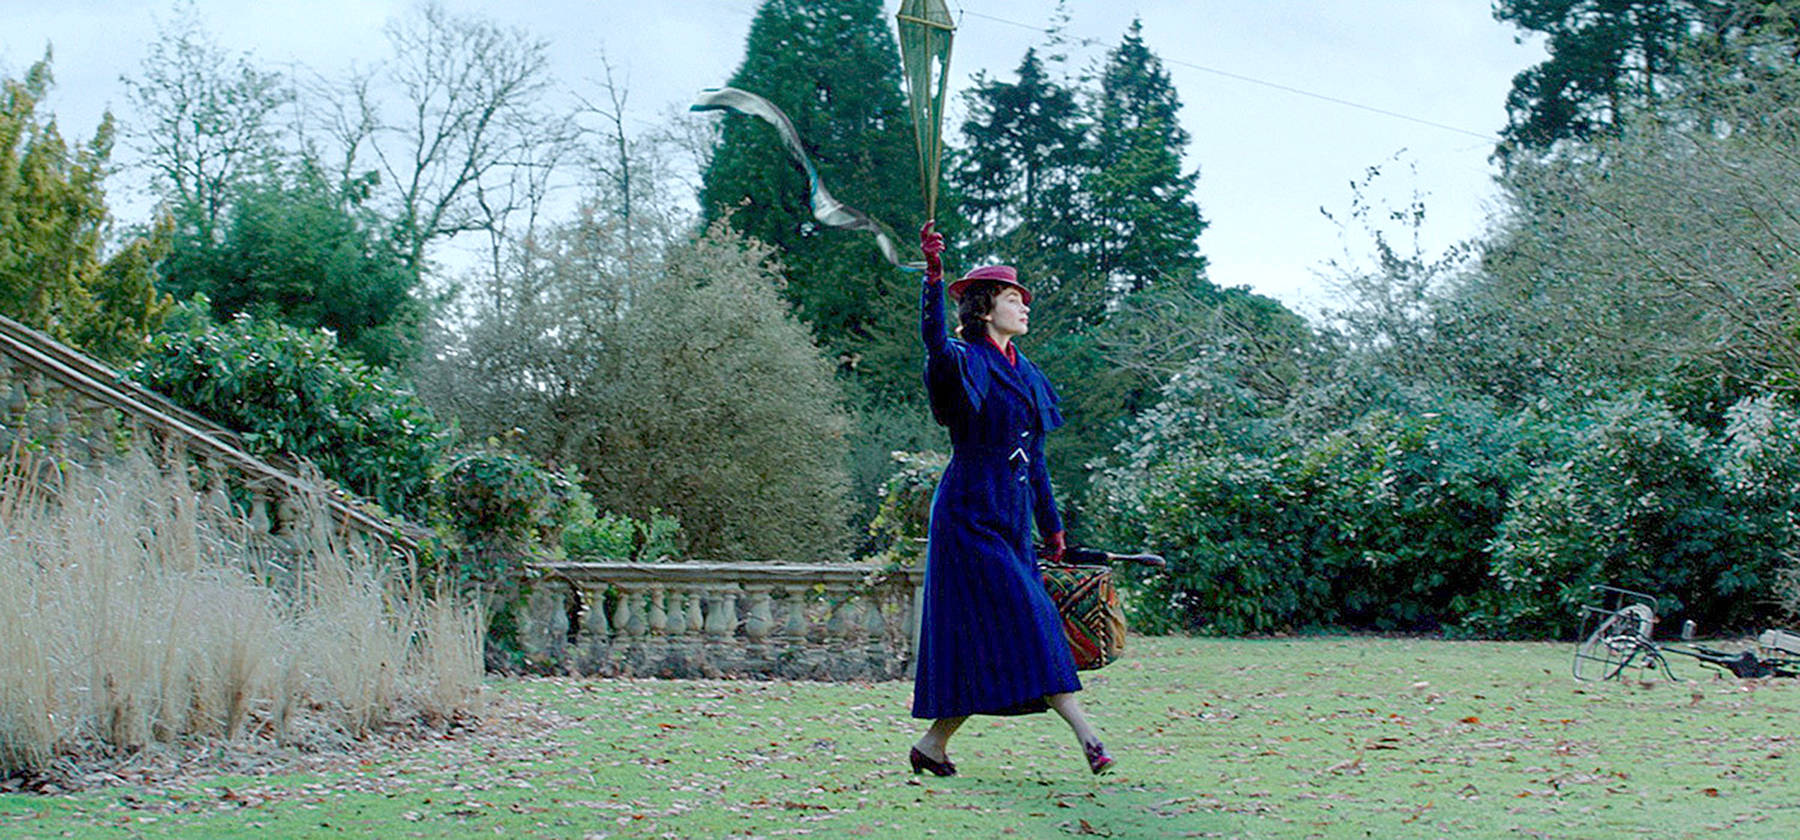 ‘Mary Poppins’ returns, but the sequel doesn’t quite achieve liftoff